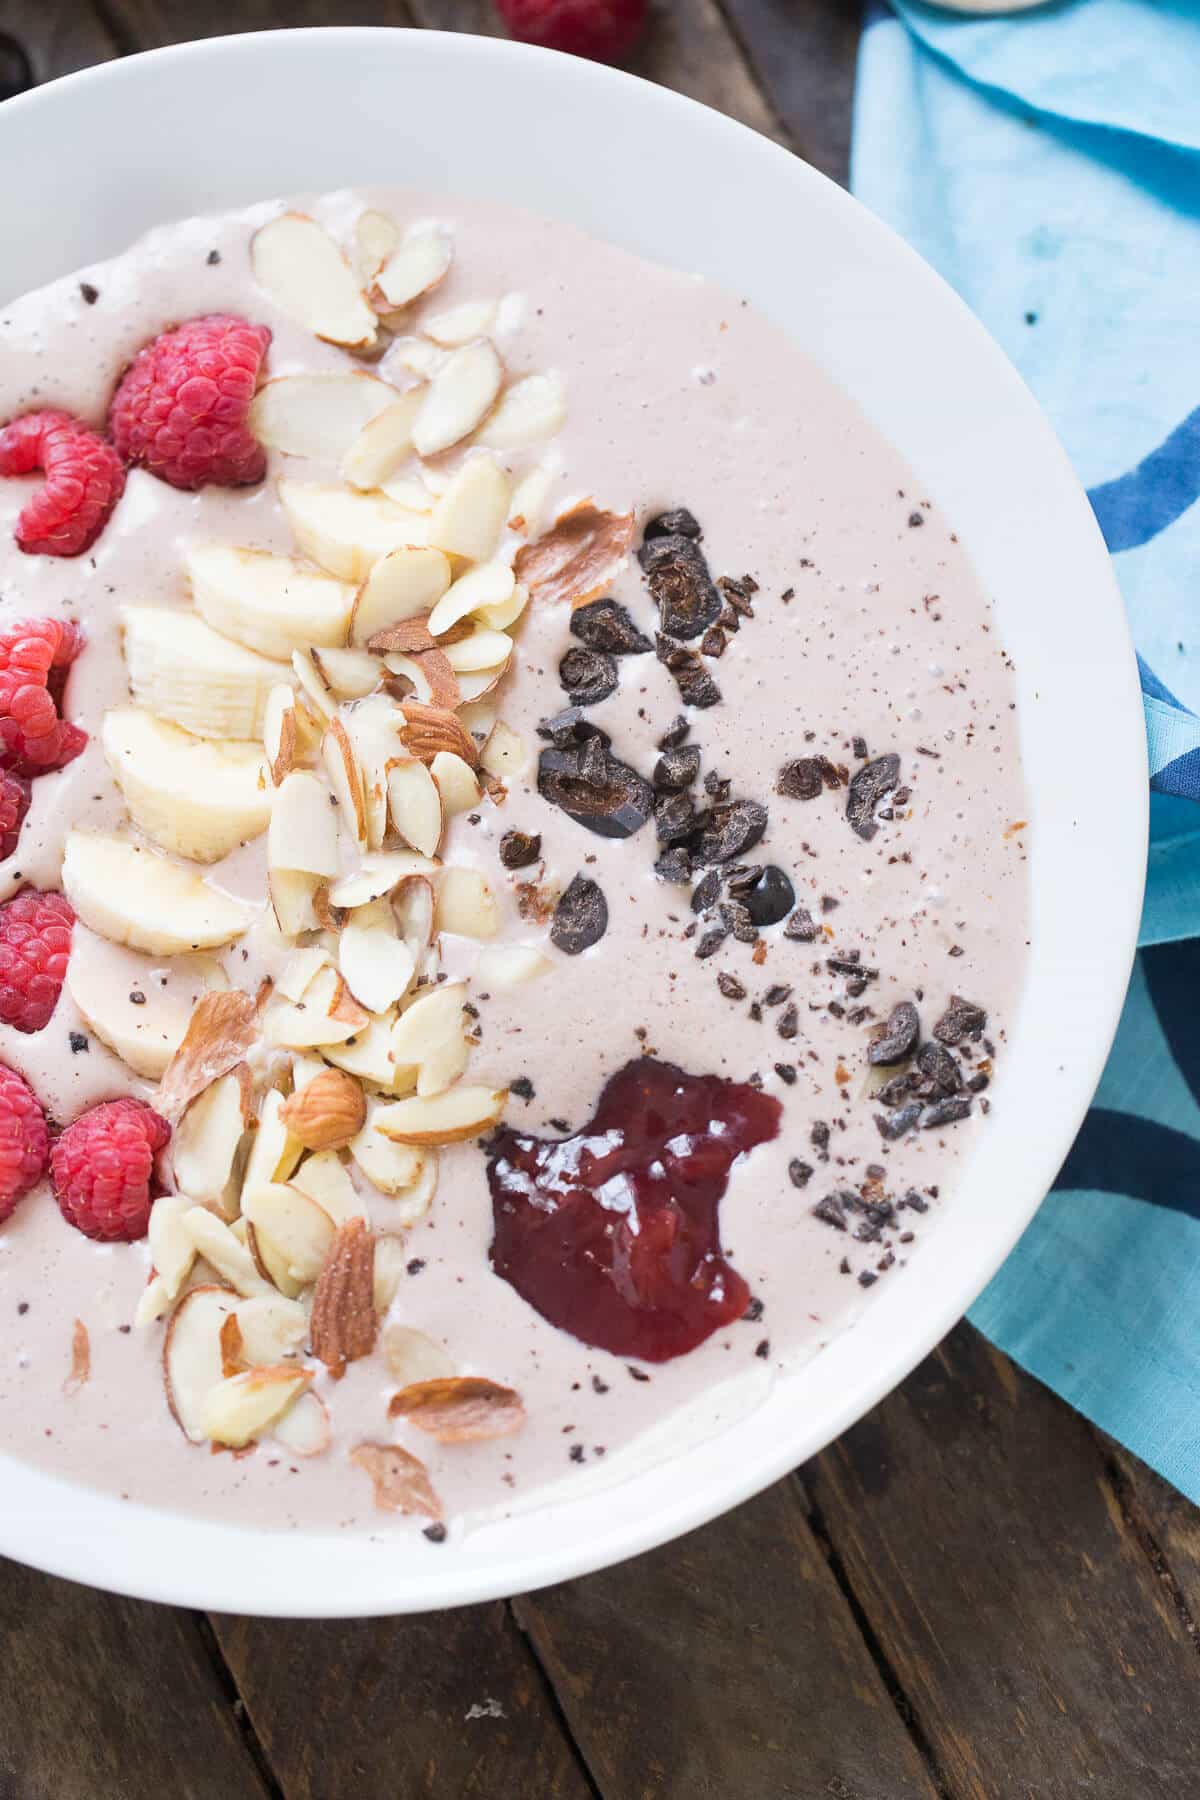 This smoothie bowl is a great way to get going in the mornings! Fresh fruit and a hint of mocha make this bowl taste amazing! 